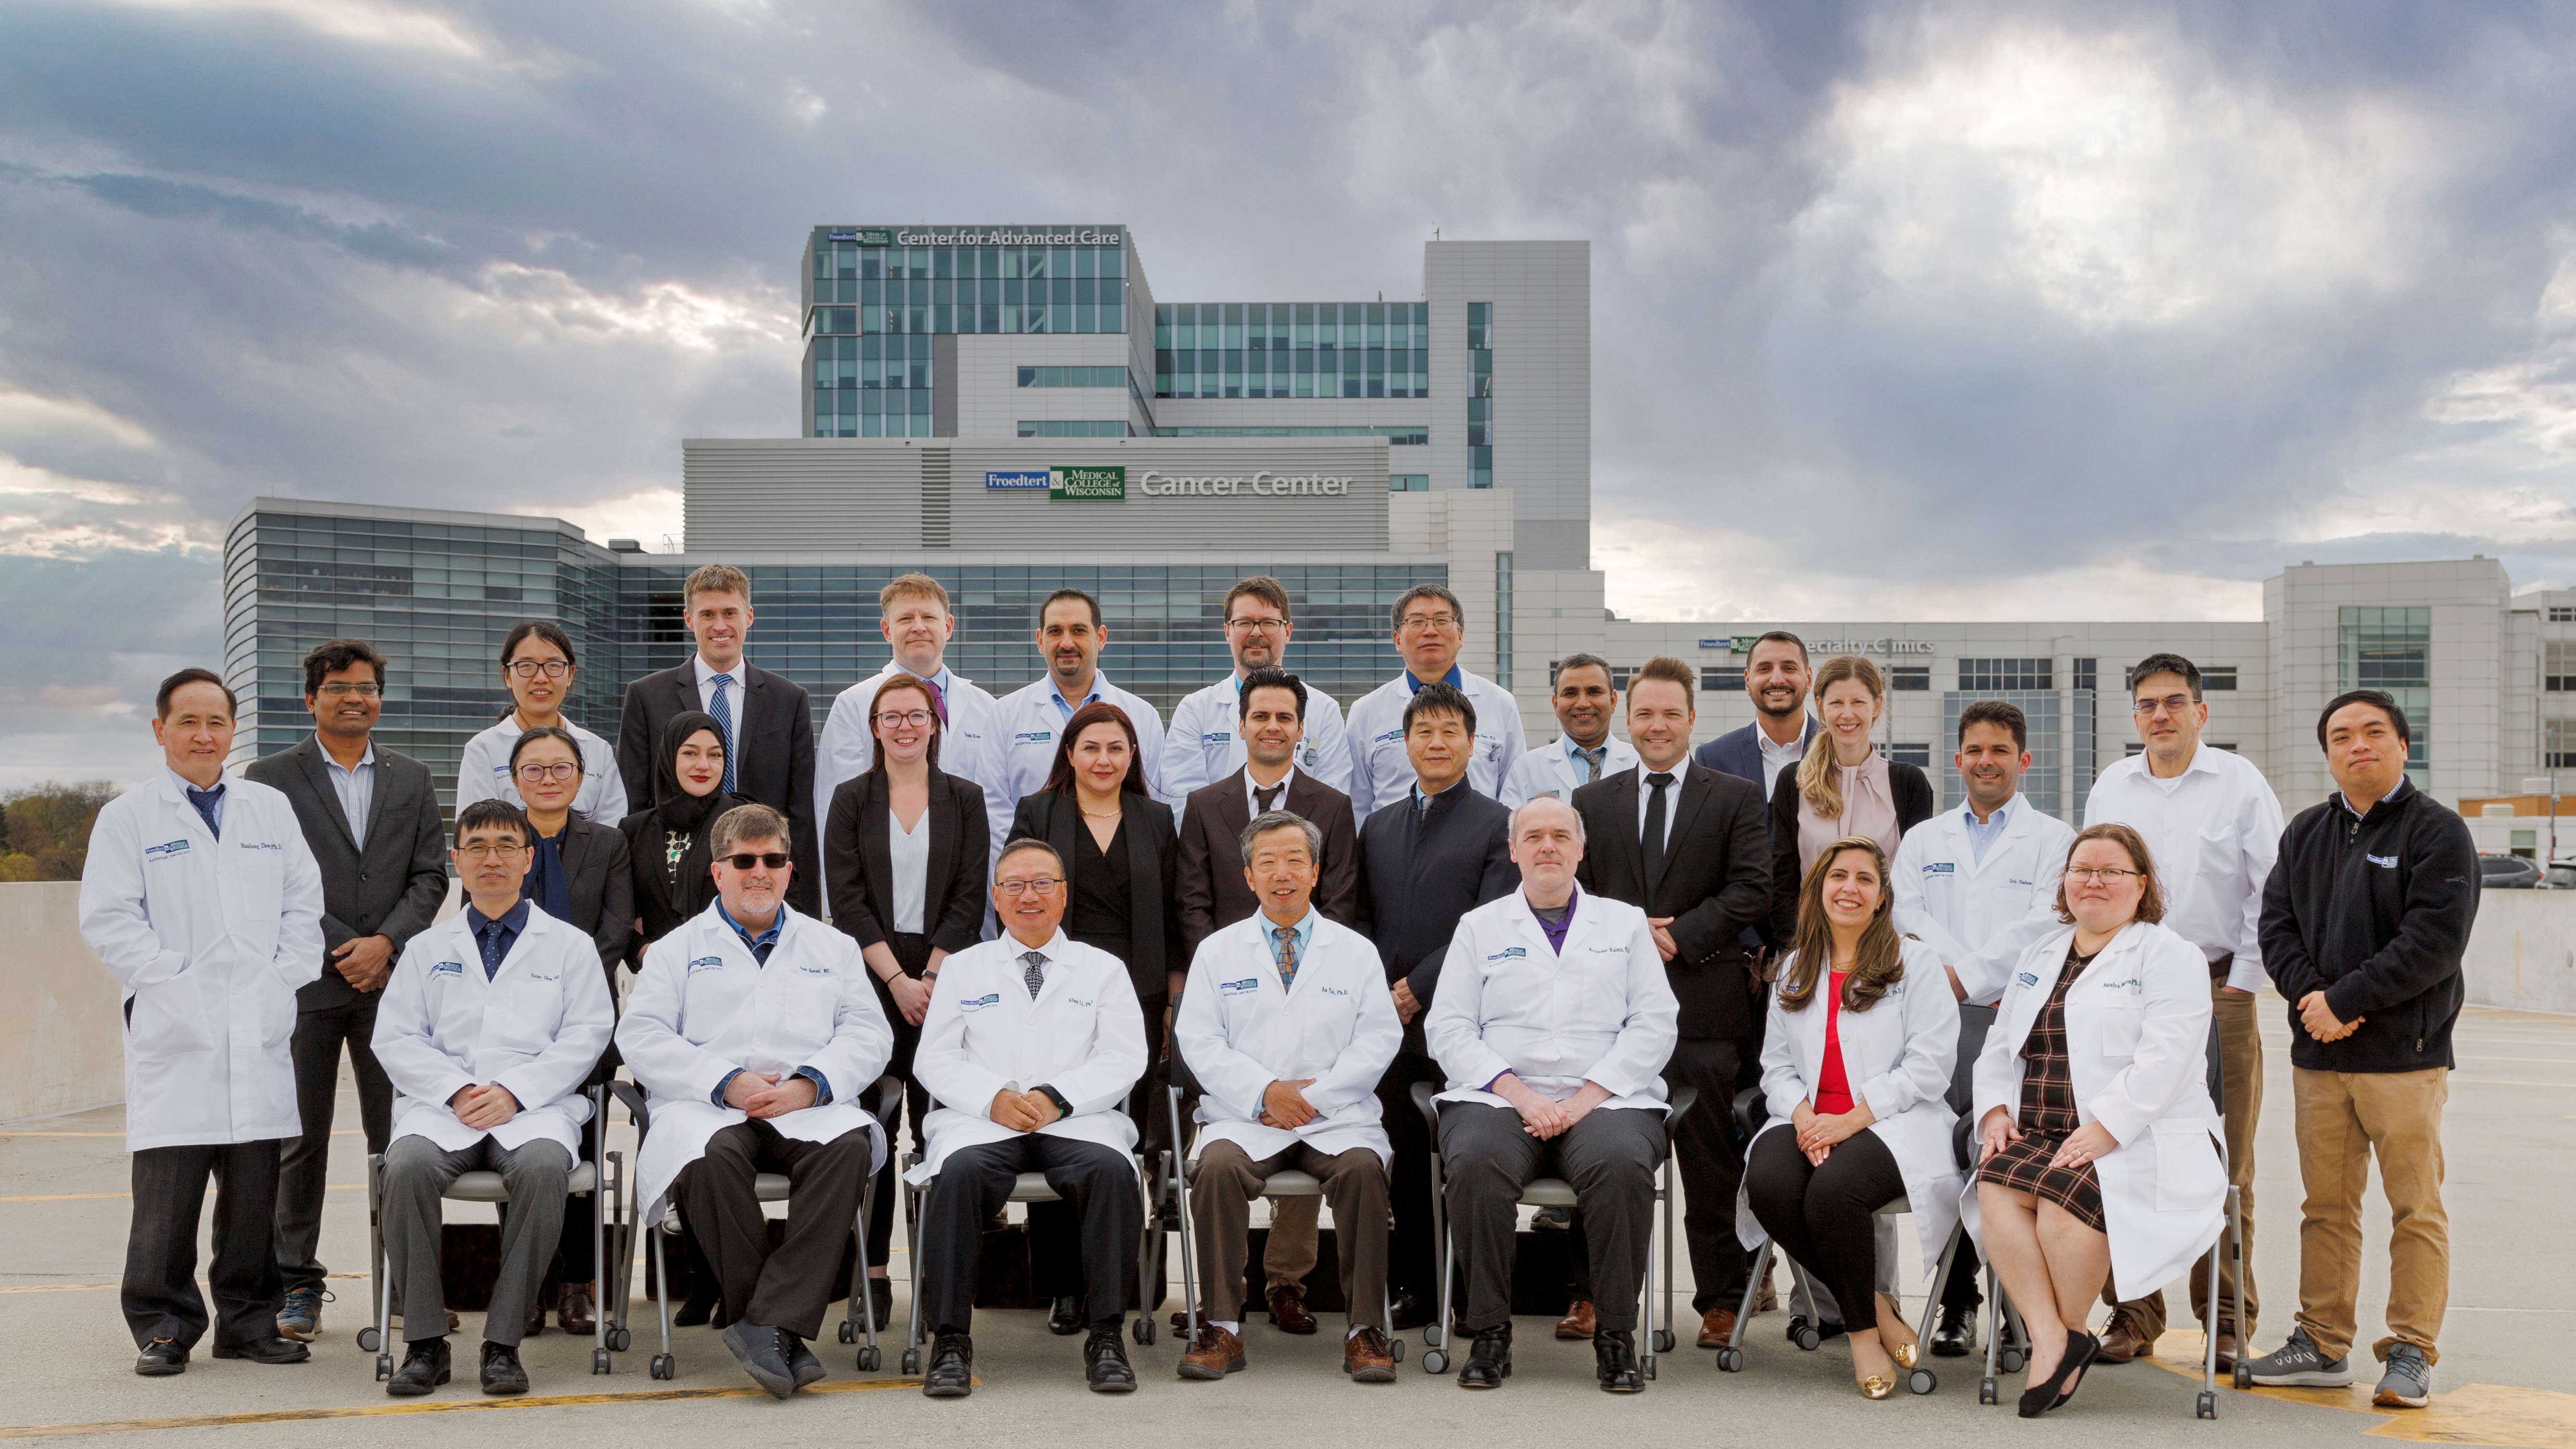 MCW Radiation Oncology Medical Physics group